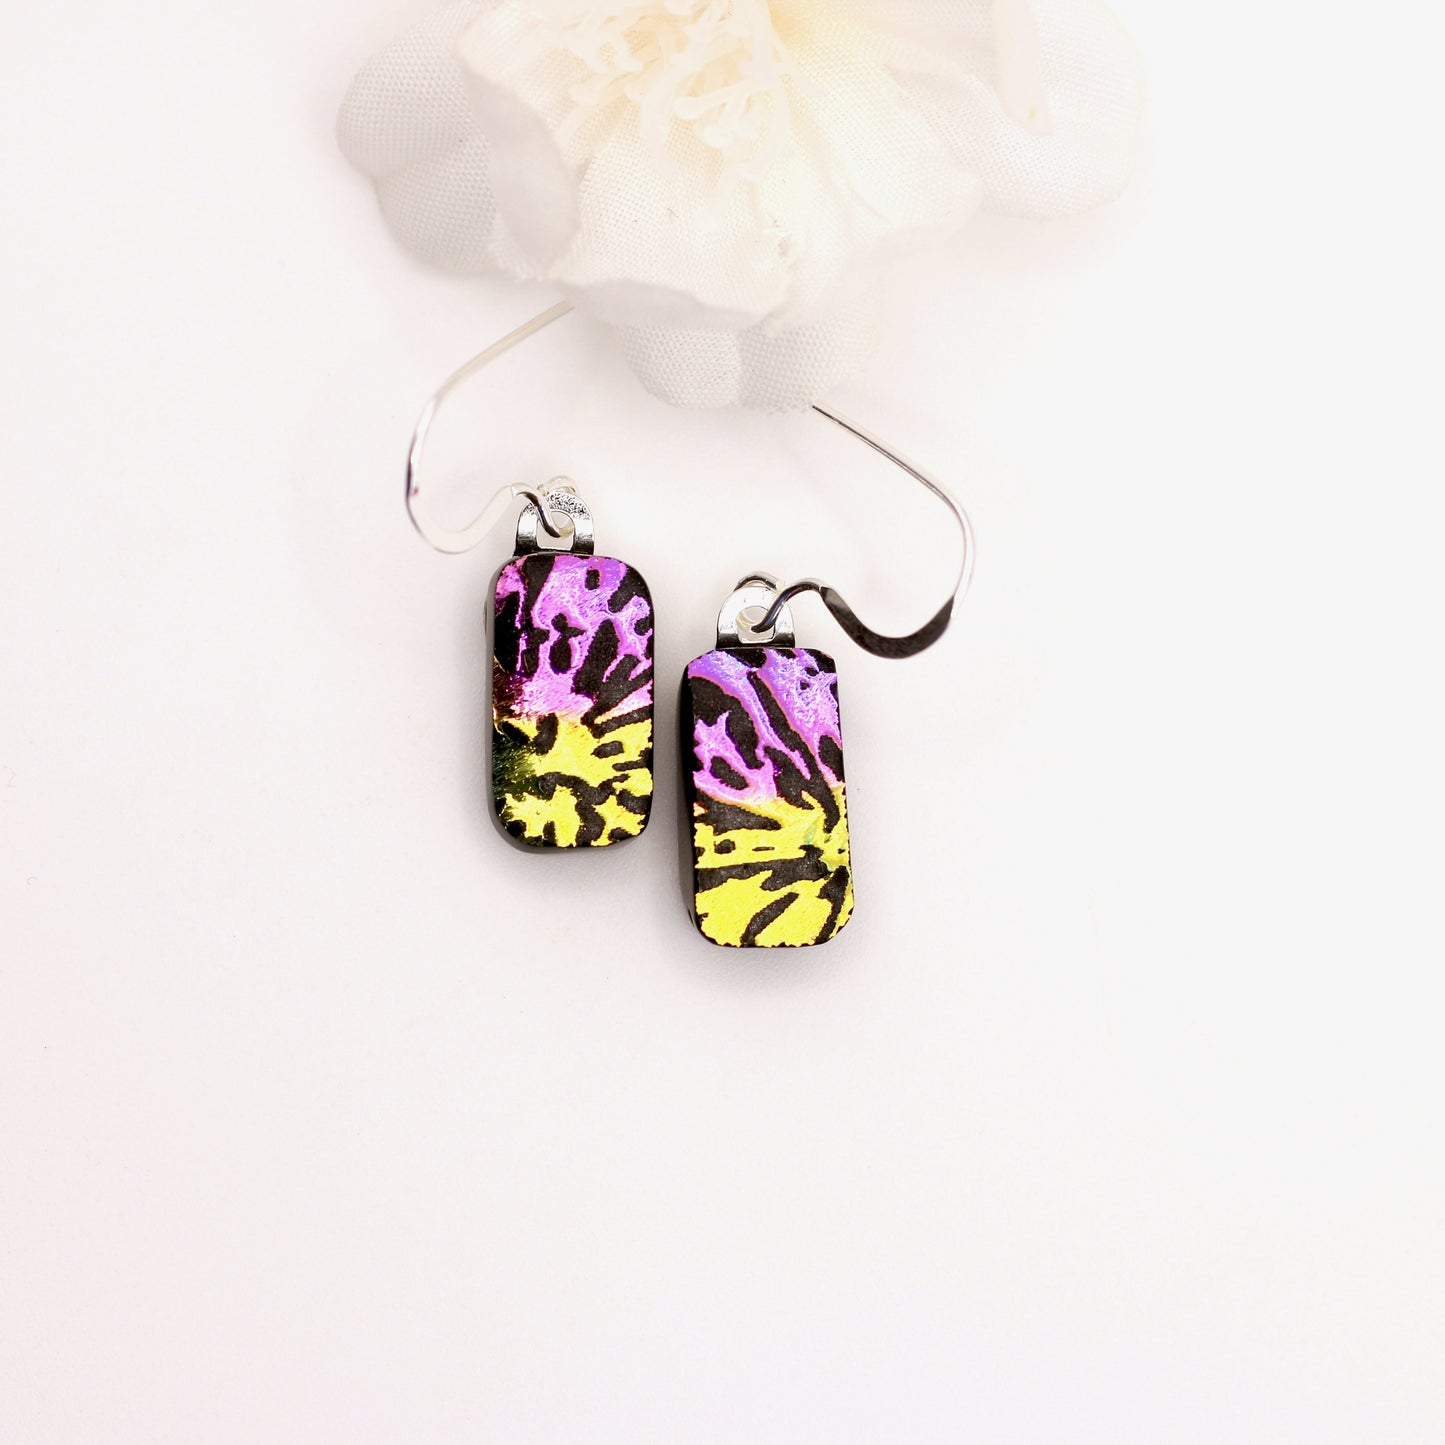 Exploding Dichroic Fused Glass Earrings - 3997